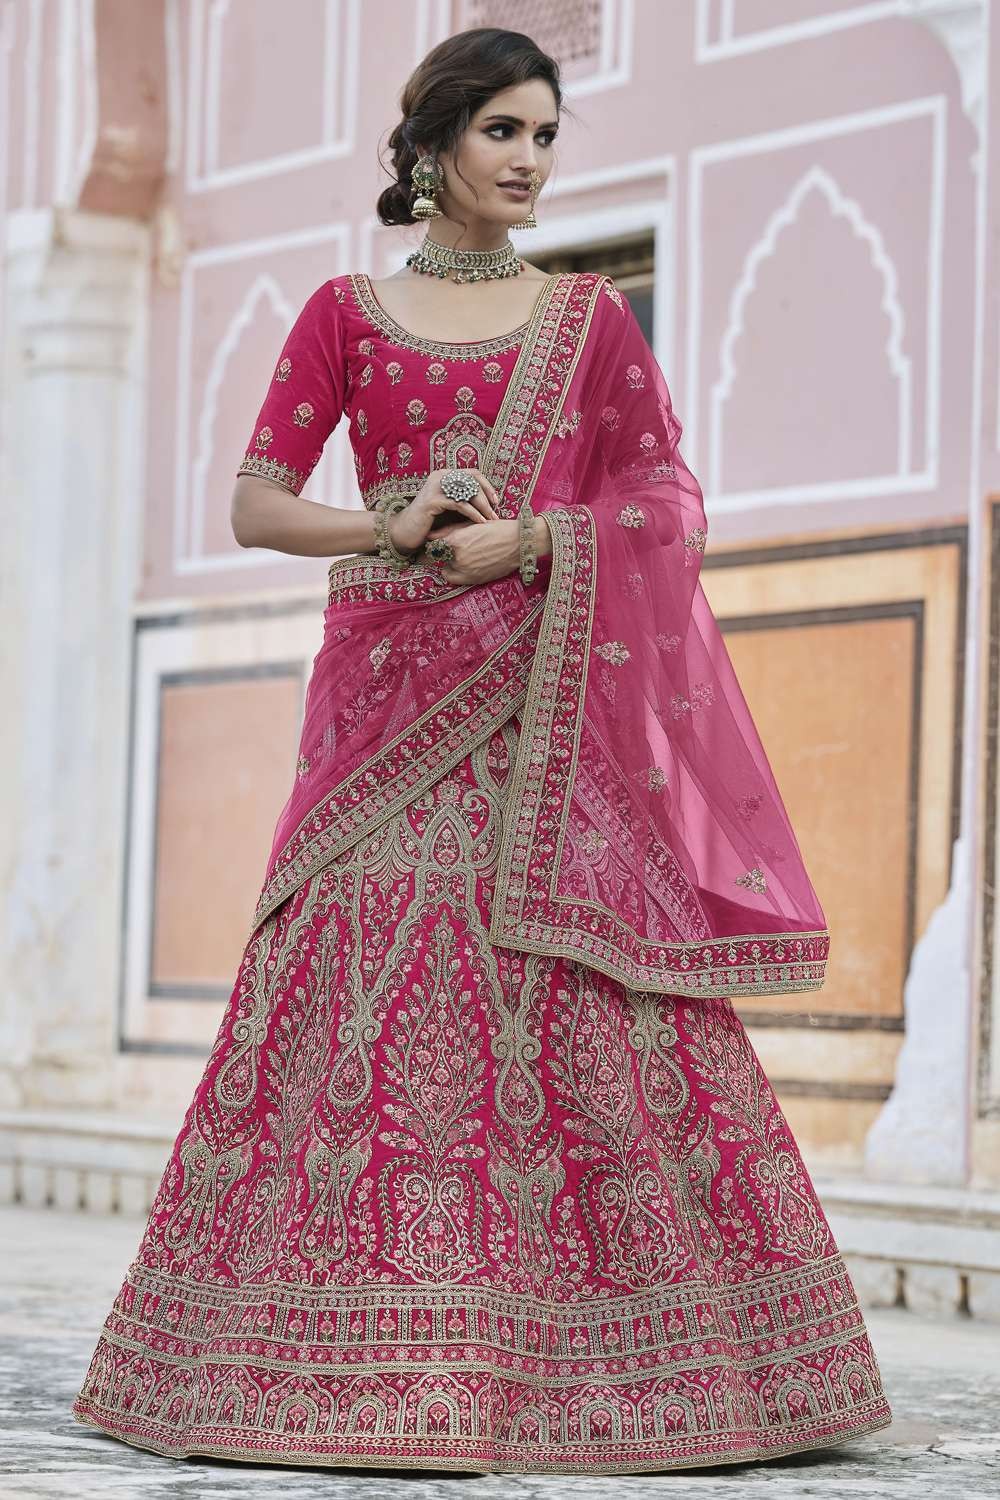 A Fusion of Tradition and Love: This Bride Crafted Her Own 18-Kali Lehenga  from Scra… | Latest bridal lehenga, Latest bridal lehenga designs, Bridal  lehenga designs